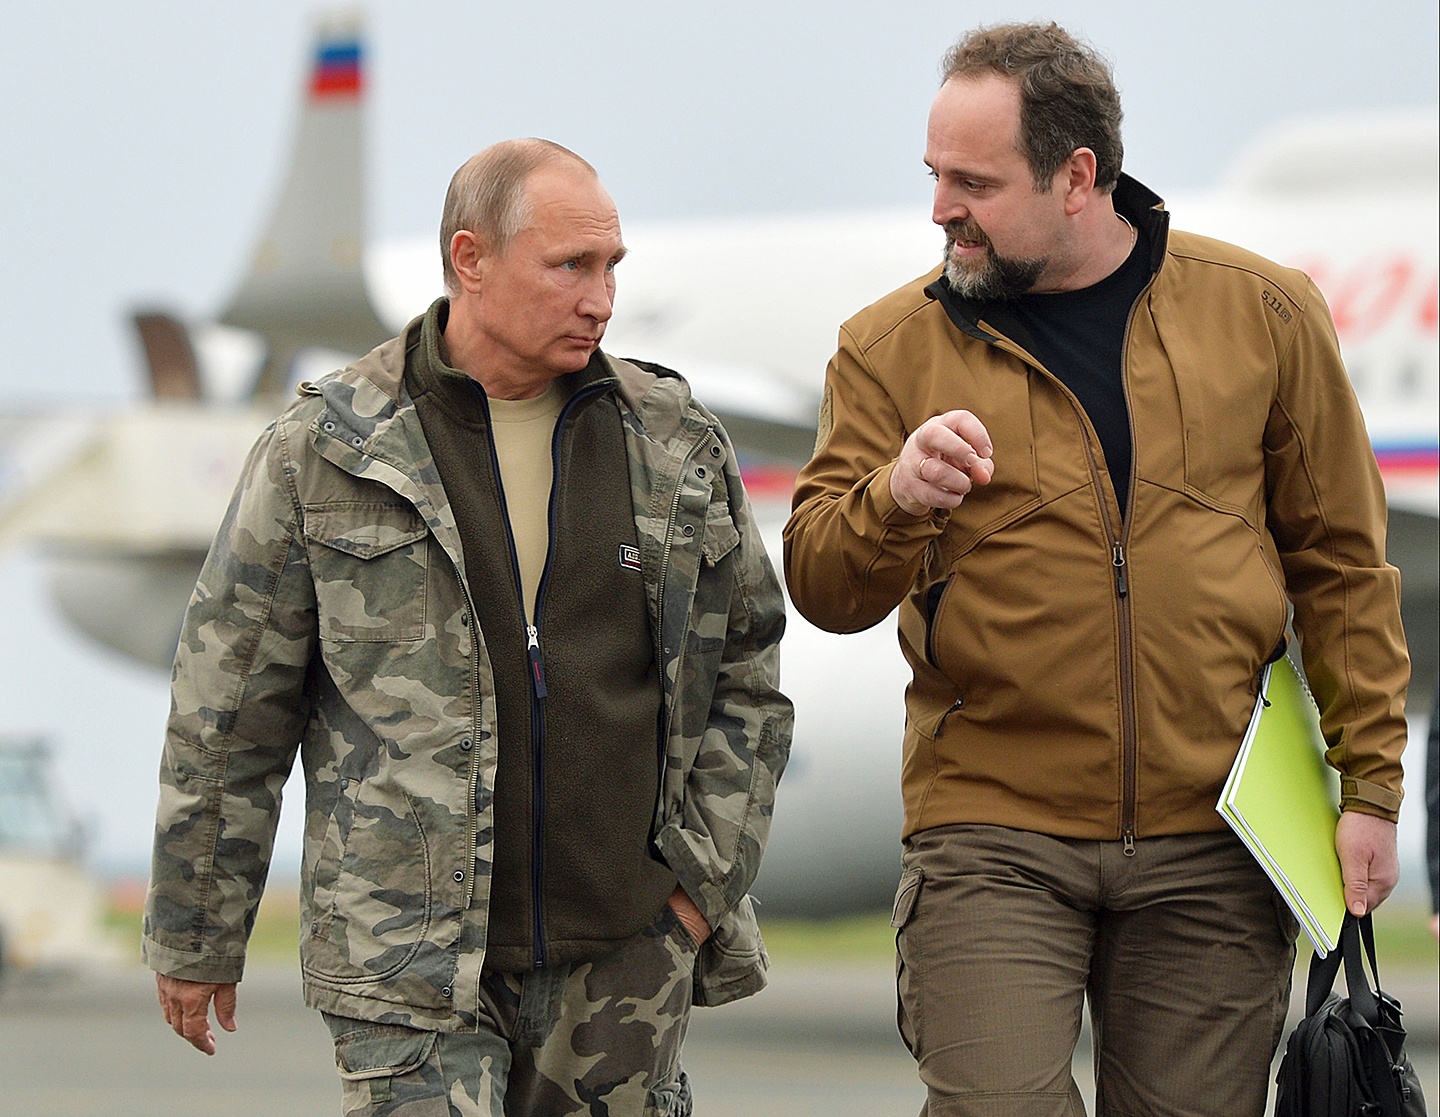 Russian President Vladimir Putin, left, walks with Minister of Natural Resources and Environment Sergei Donskoi on arrival in the Urals city of Orenburg, about 800 miles southeast of Moscow, on Monday. (Alexei Druzhinin/Sputnik, Kremlin Pool Photo via AP)